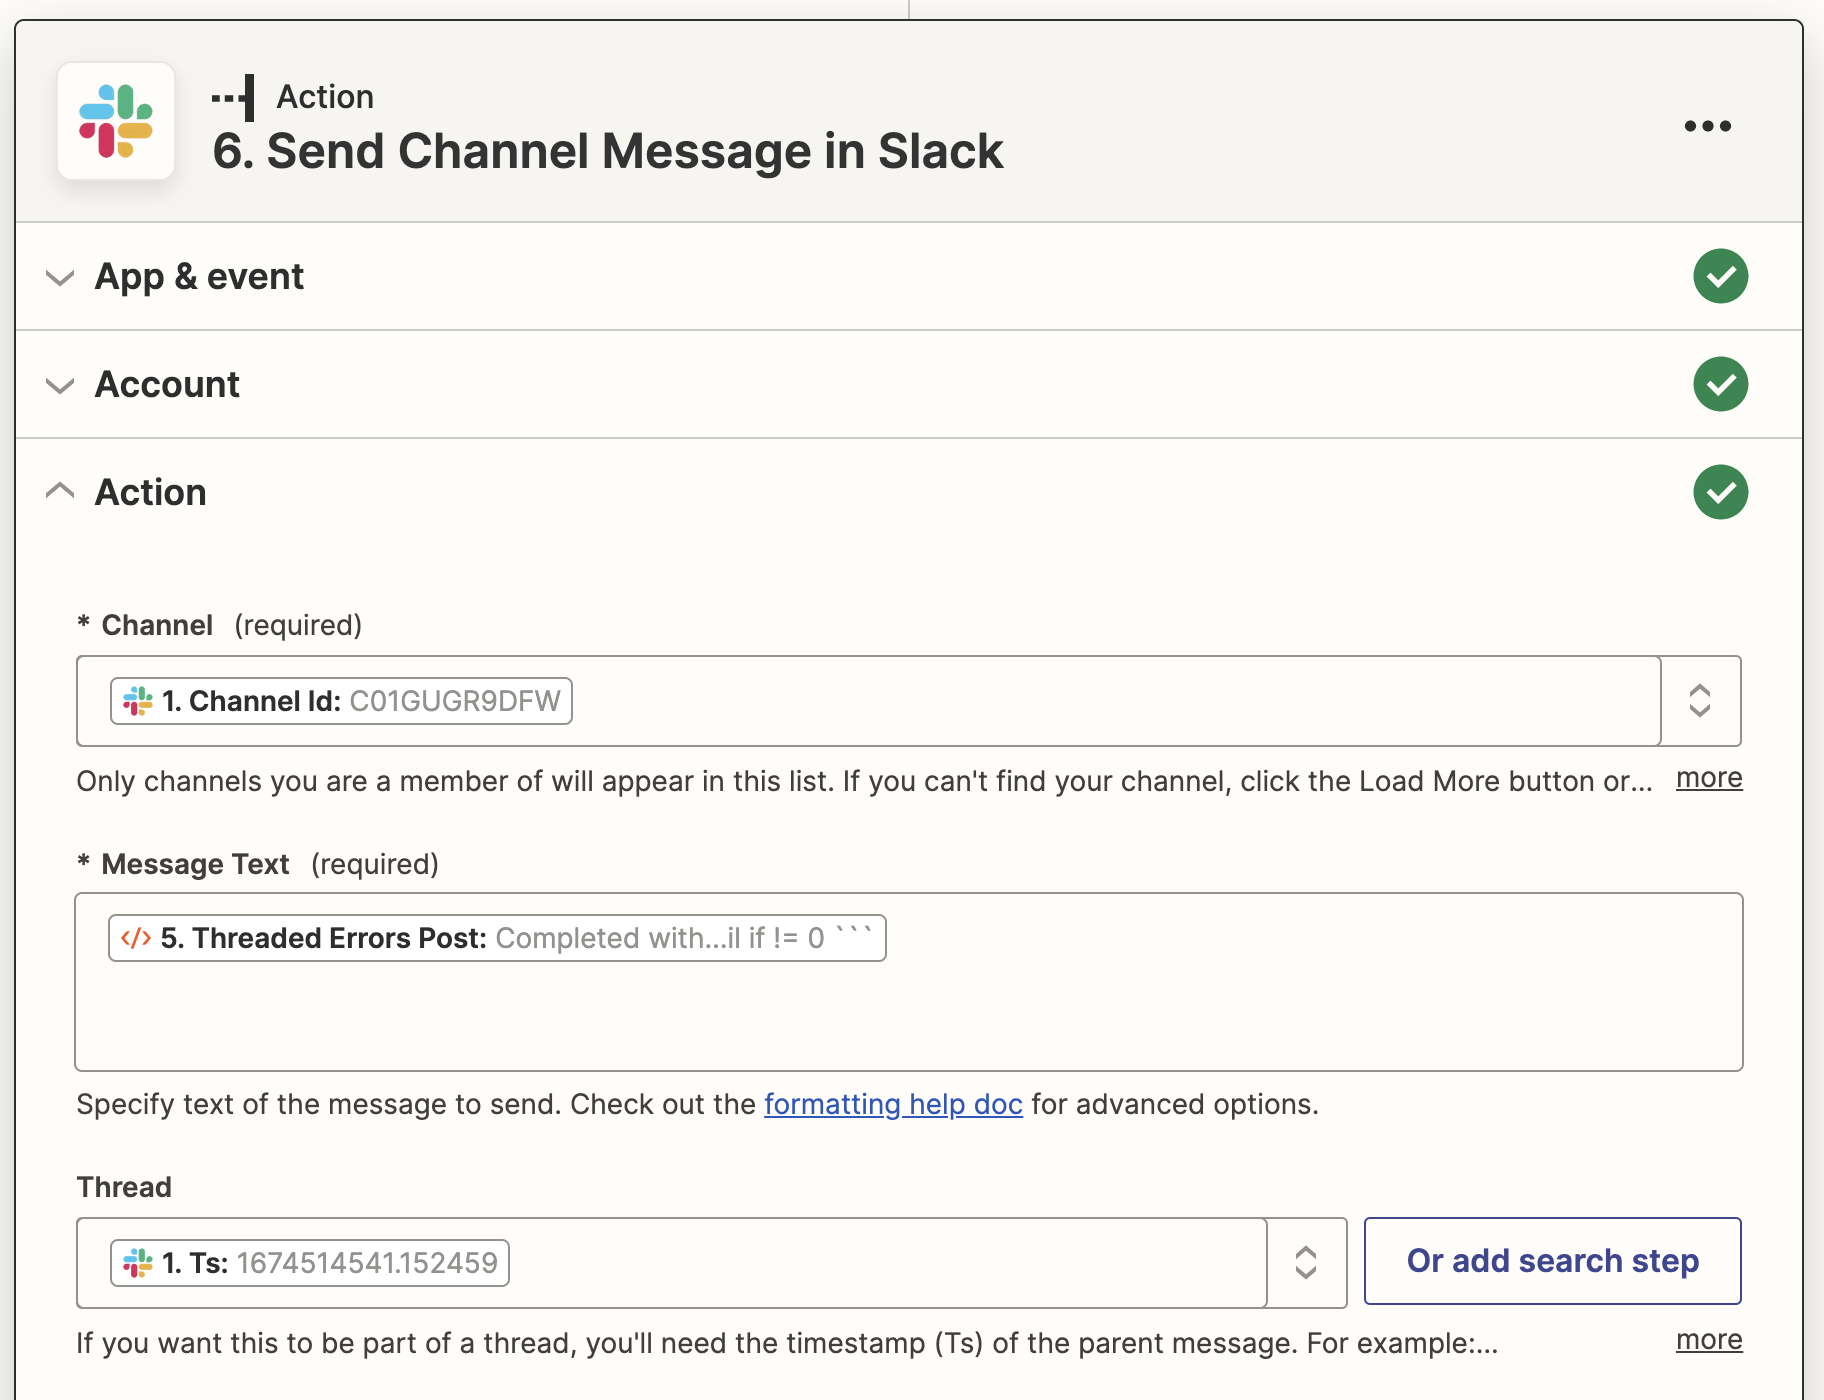 Screenshot of the Zapier UI, showing the mappings of prior steps to a Slack message